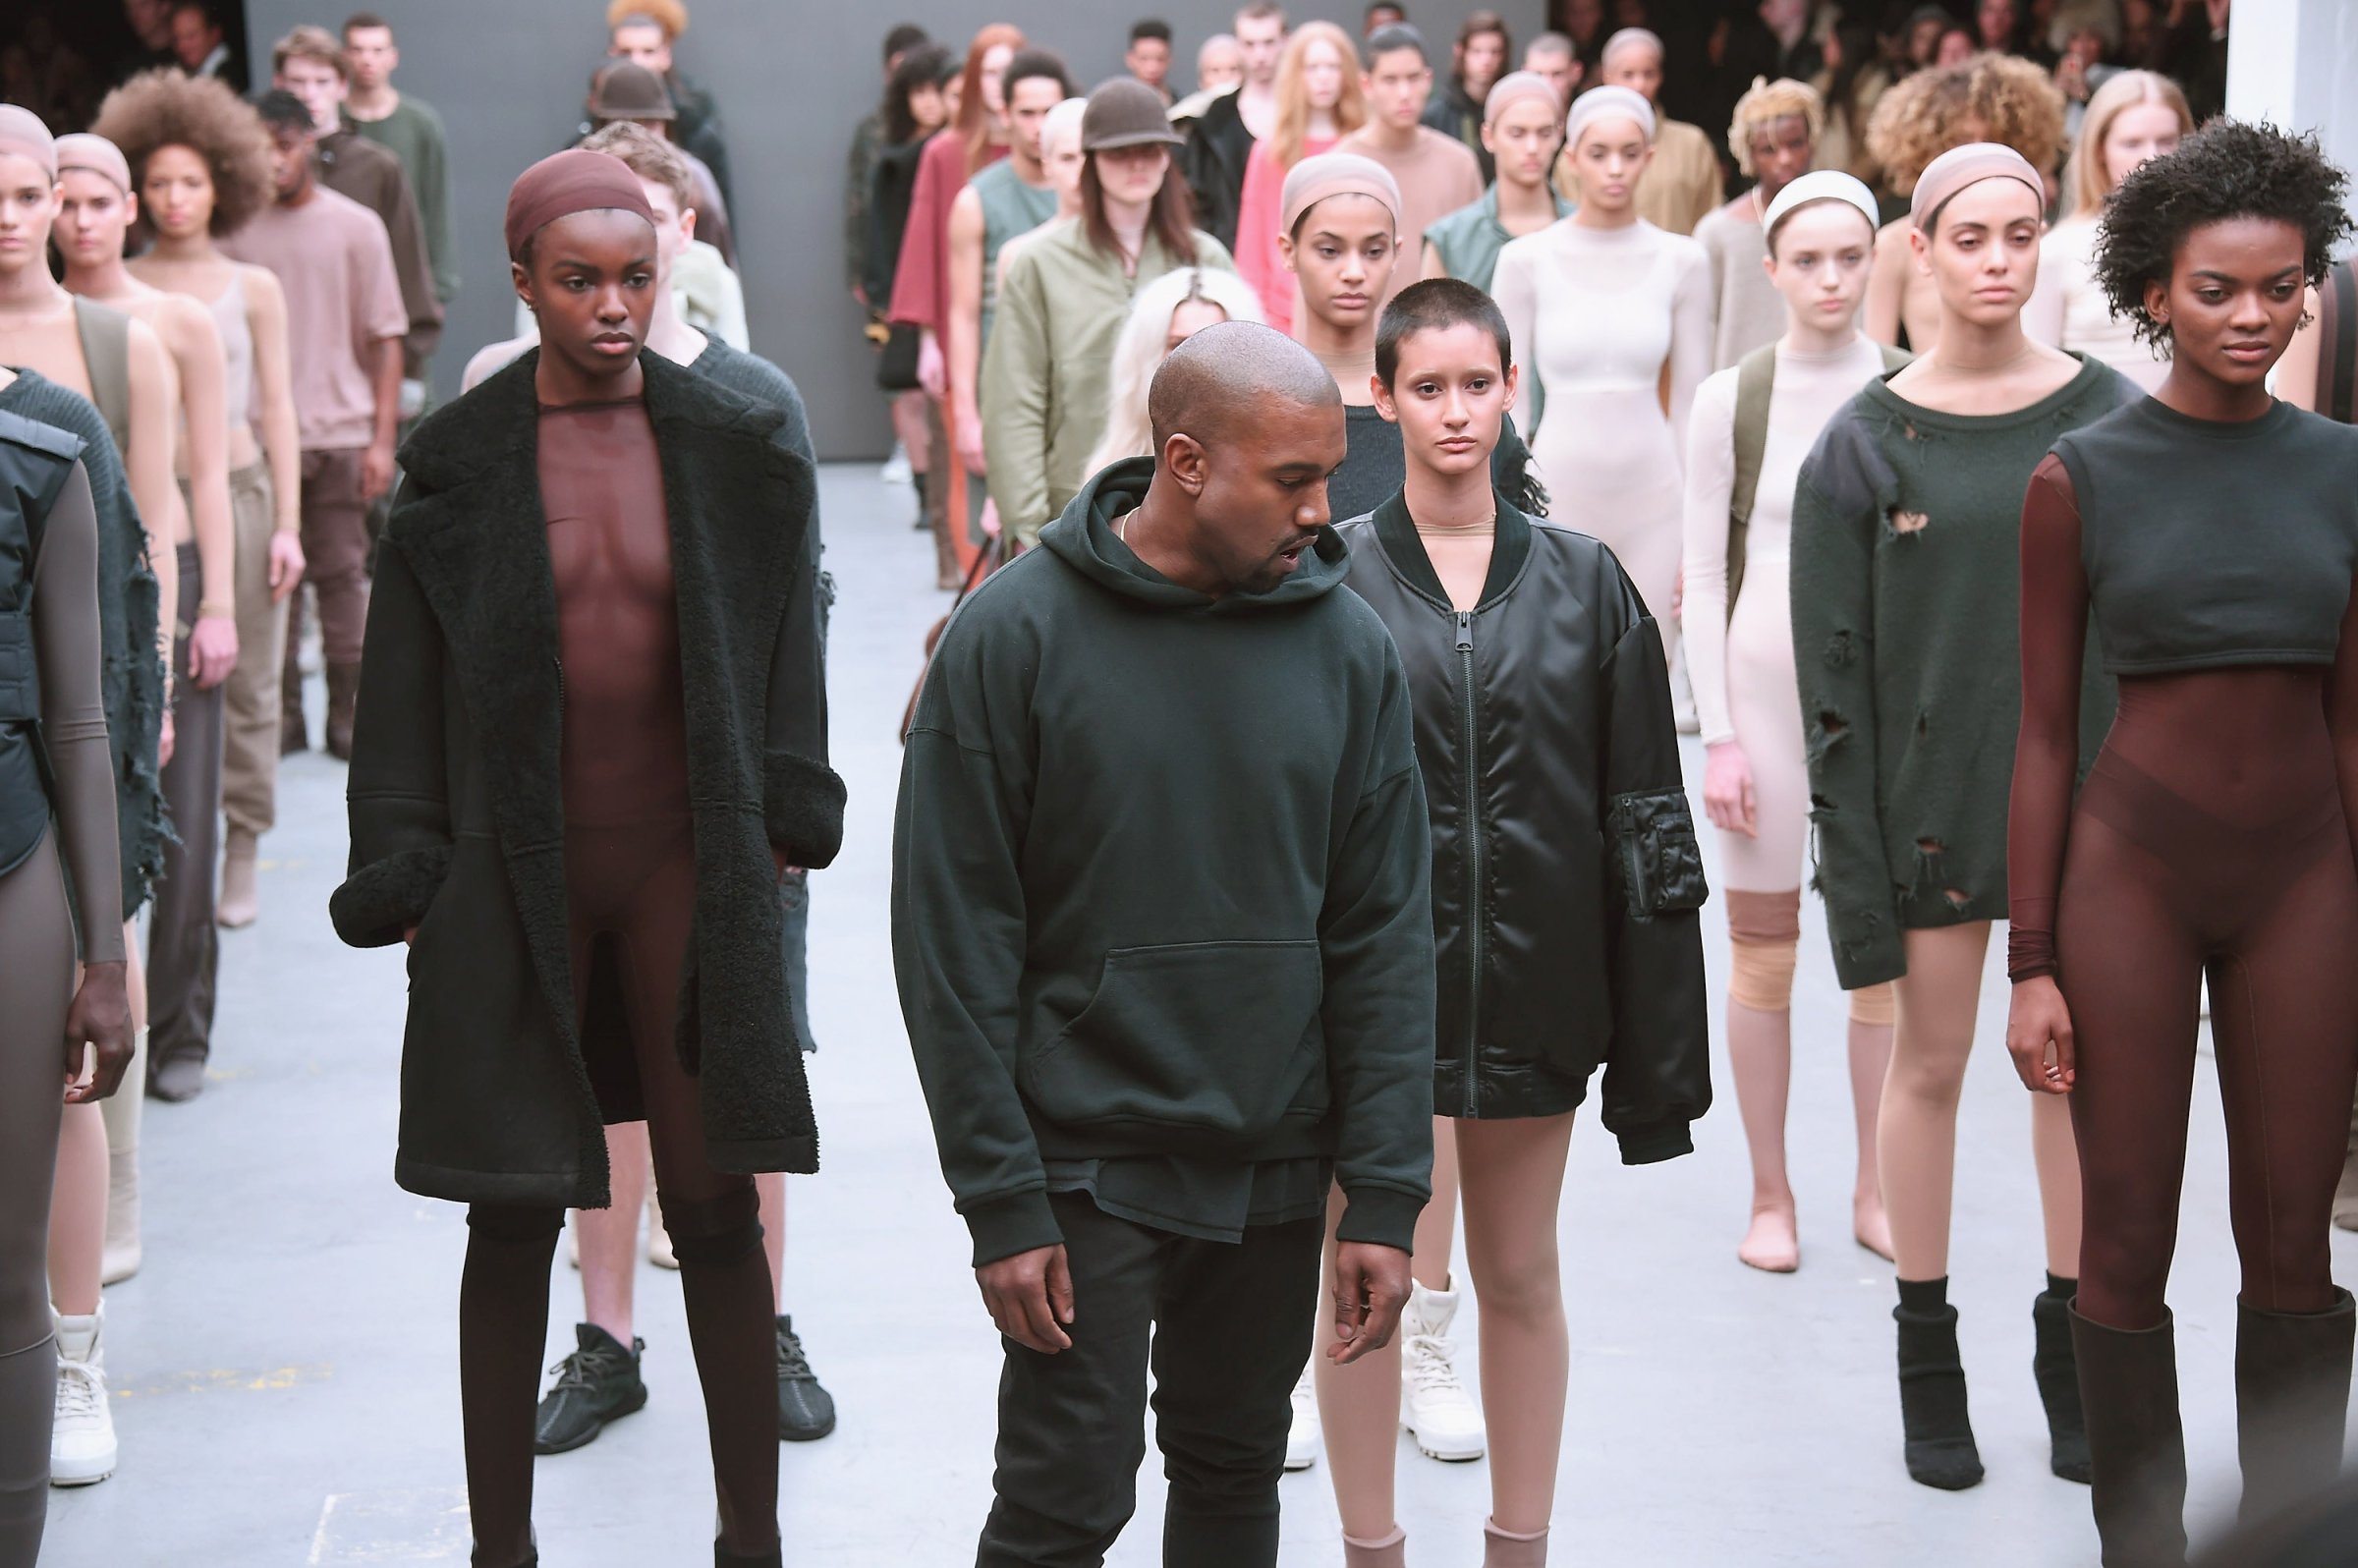 Kanye West attends the Adidas show during Mercedes-Benz Fashion Week Fall 2015 at Skylight Clarkson SQ. on Feb. 12, 2015 in New York City.